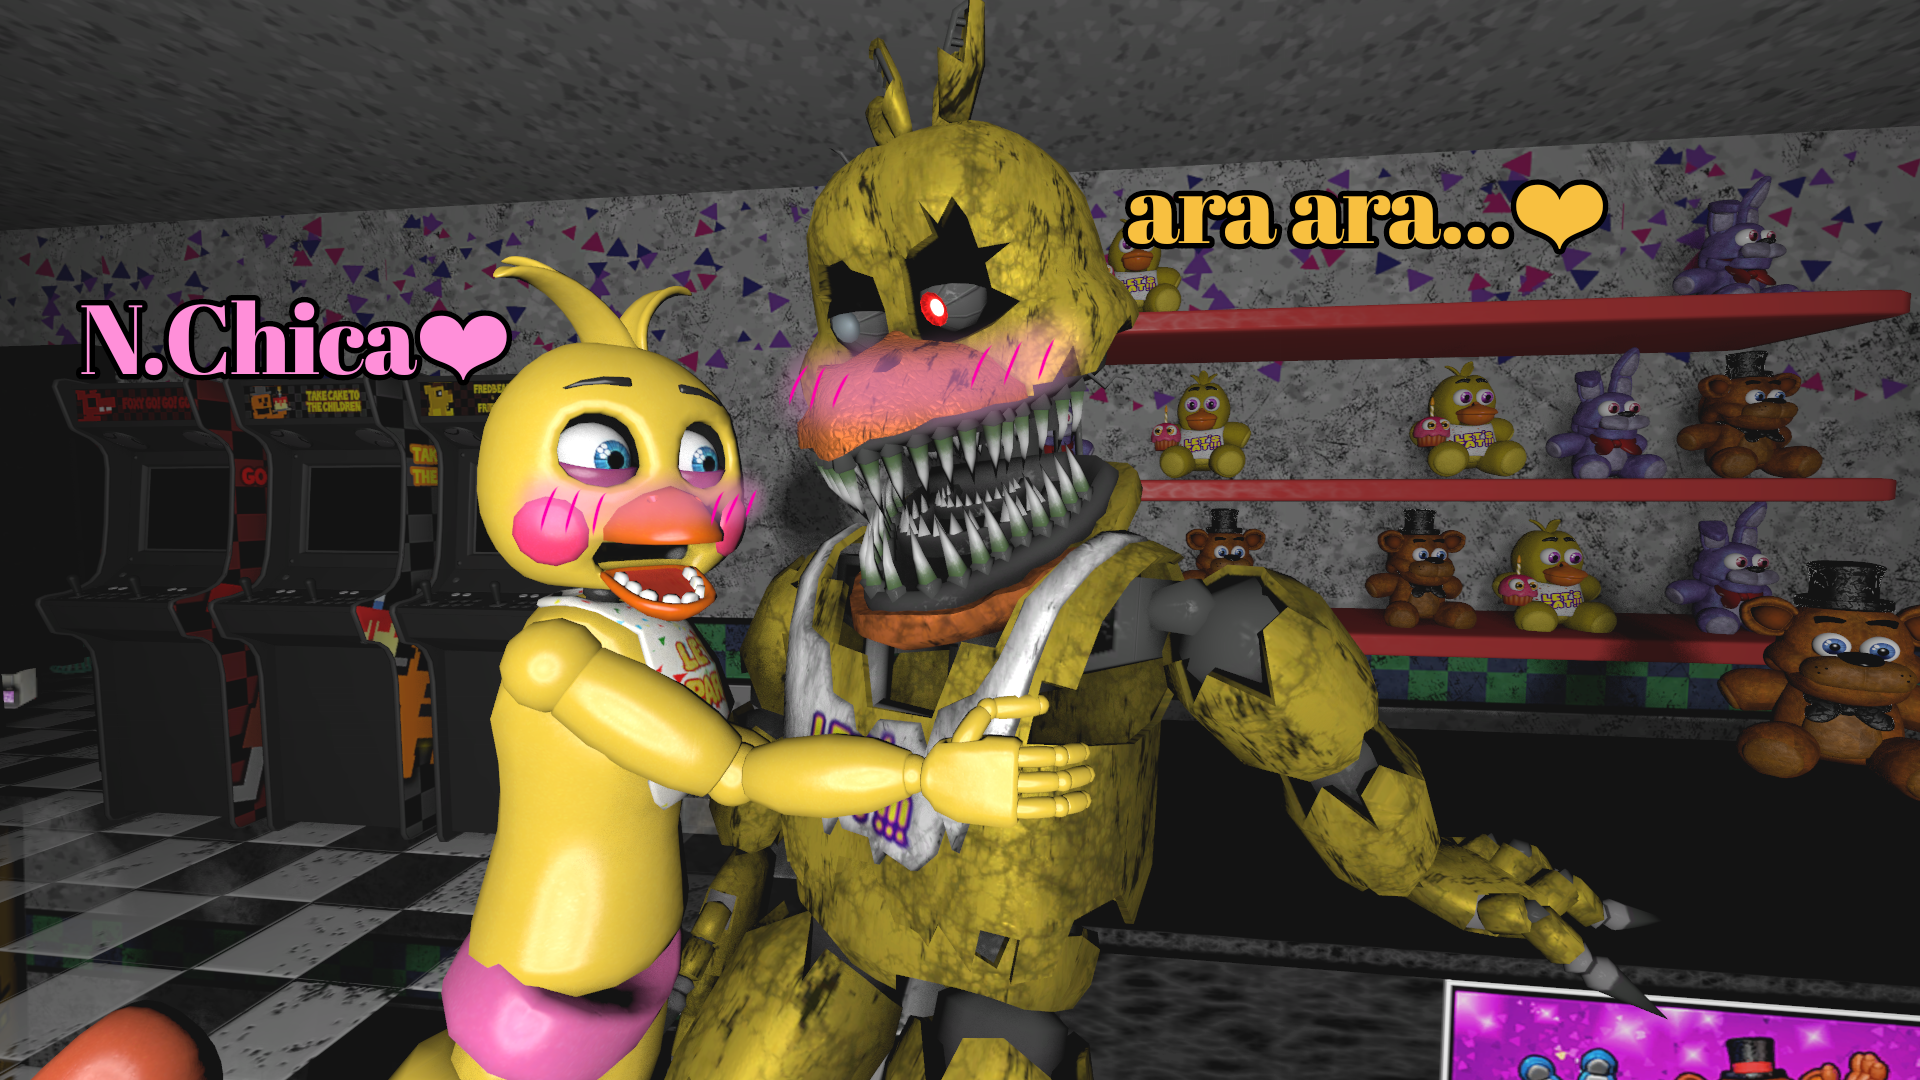 Nightmare Toy Chica (Model by me)